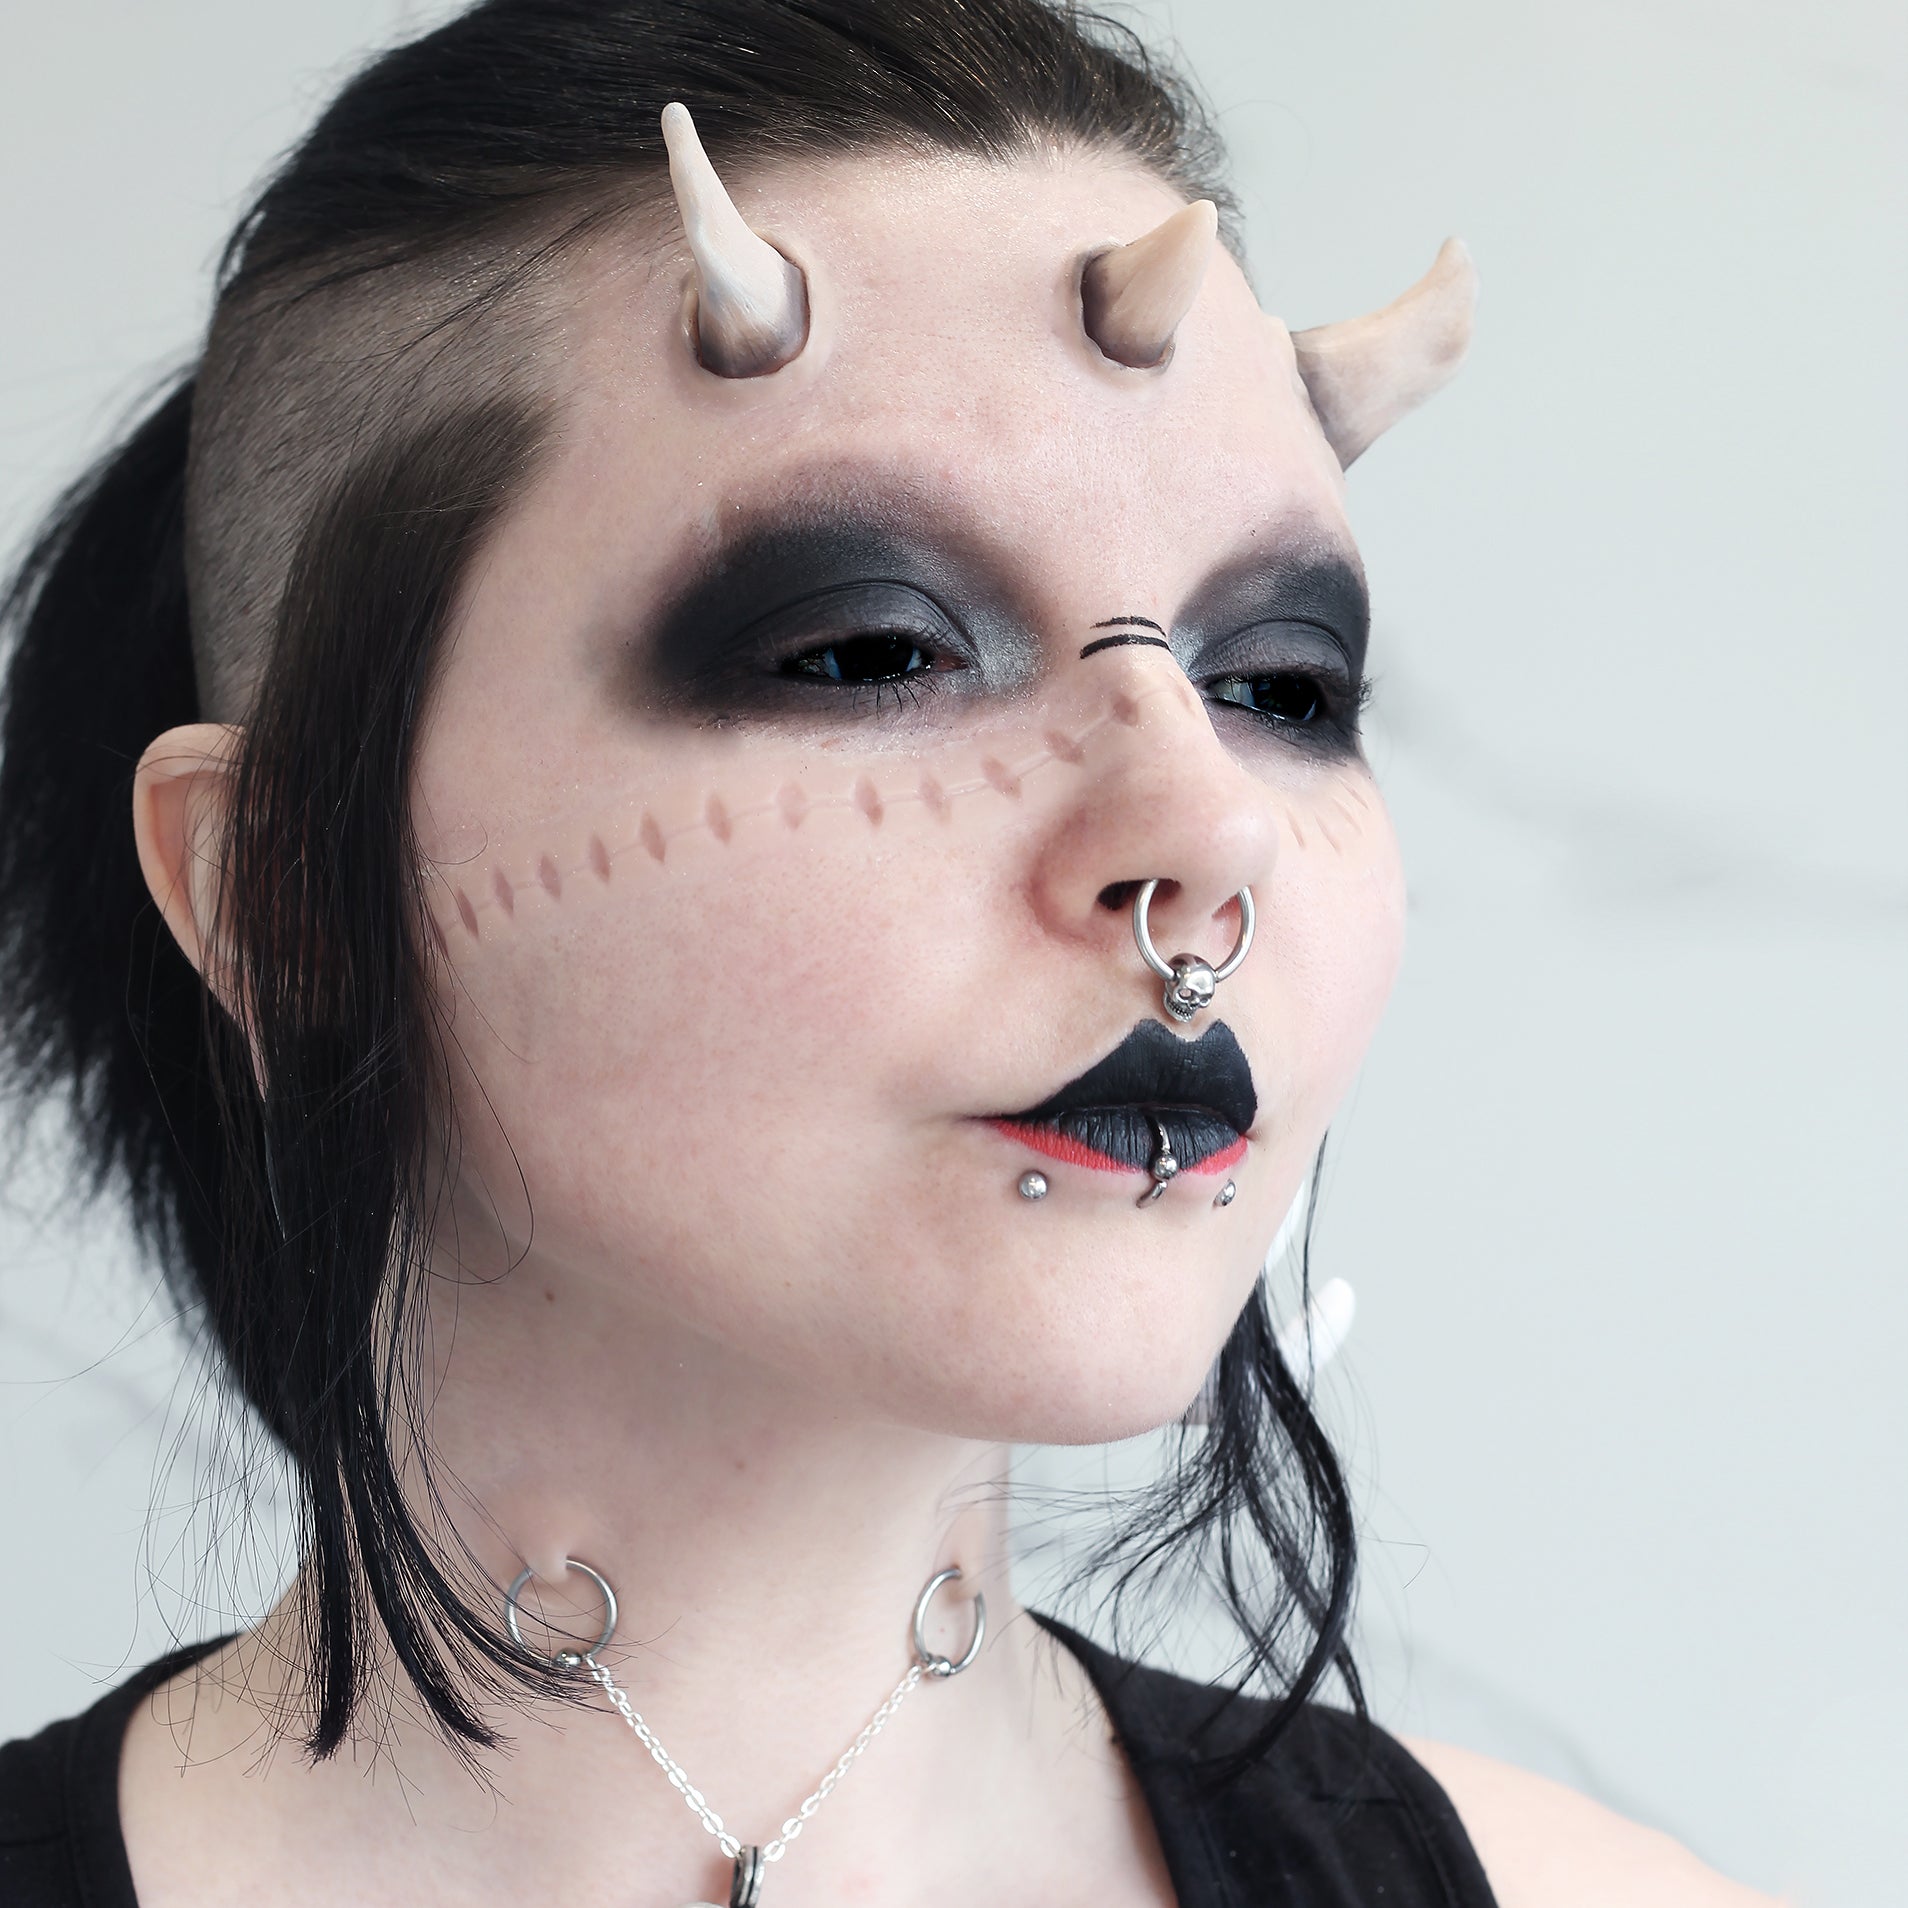 Woman with black hair wearing dark makeup, crooked horns, and scarification strip prosthetics